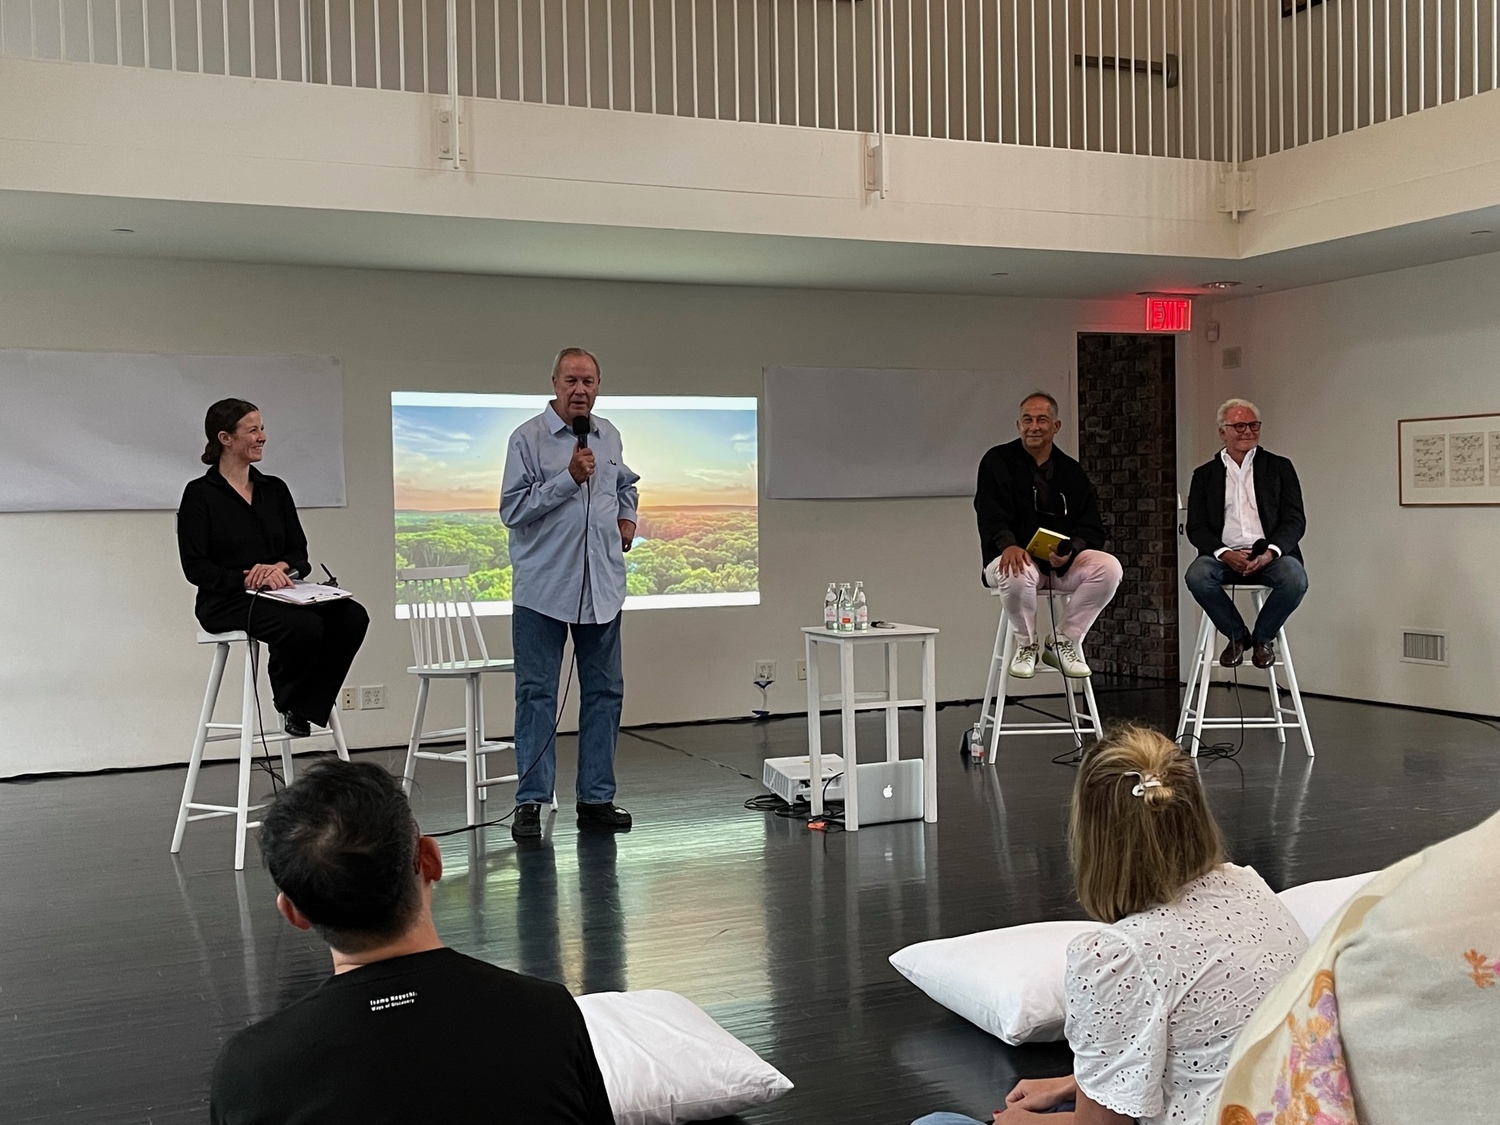 From left, Watermill Center events manager Jillian Maxwell, Watermill Center founder and artistic director Robert Wilson, architect Enric Ruiz-Geli and architect Roger Ferris. Behind Wilson on the screen is a birds-eye view of the Watermill Center property.
ANNE SURCHIN